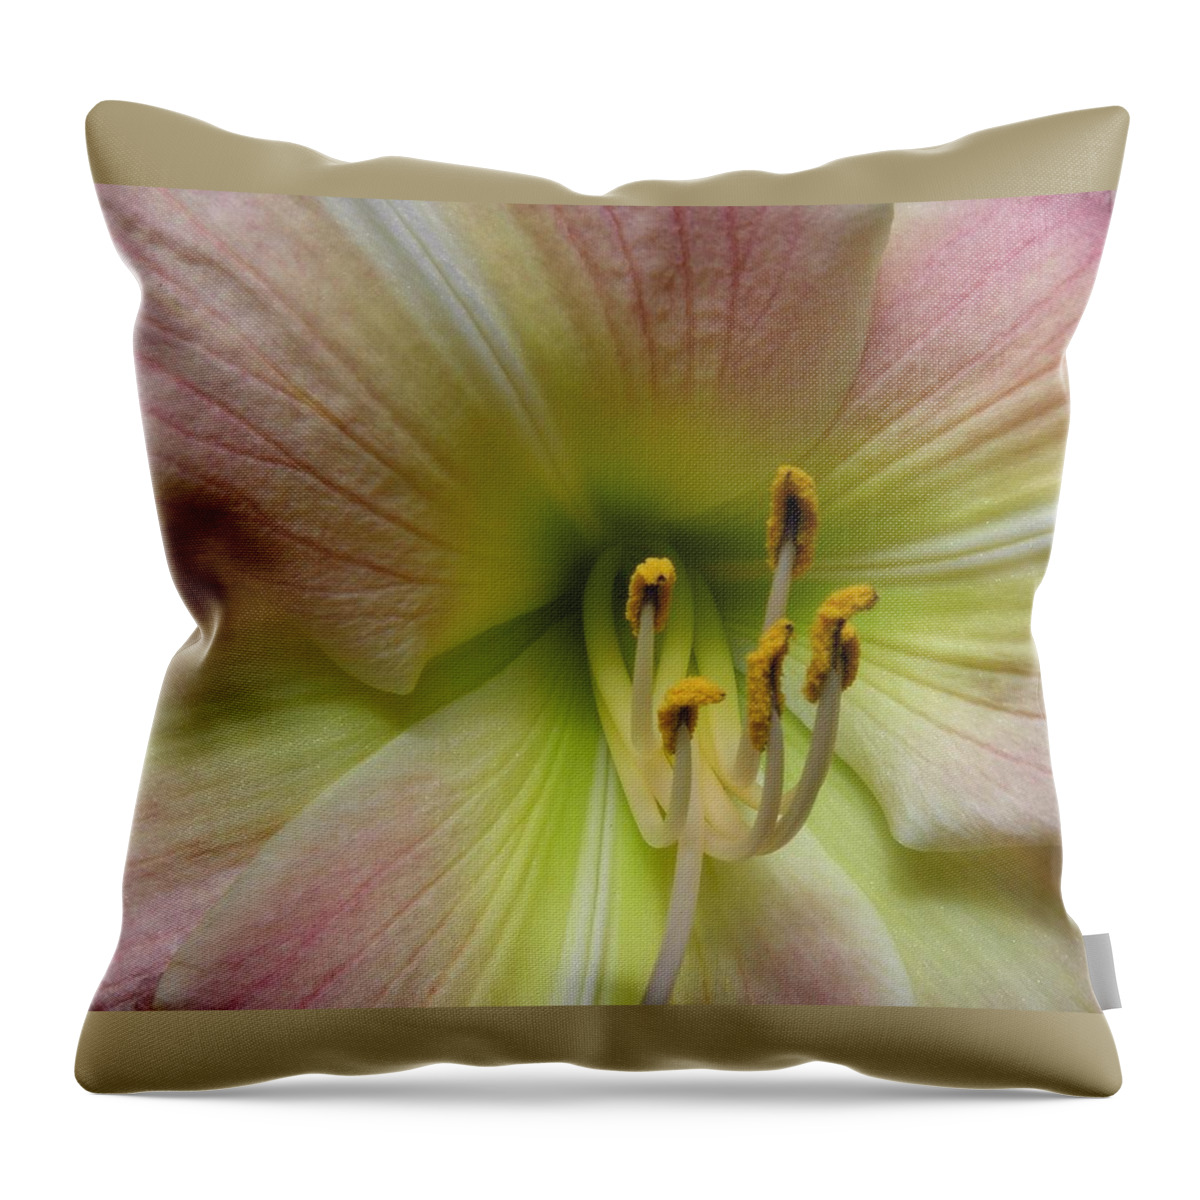 Lily Throw Pillow featuring the photograph Up Close And Personal Beauty by Kim Galluzzo Wozniak